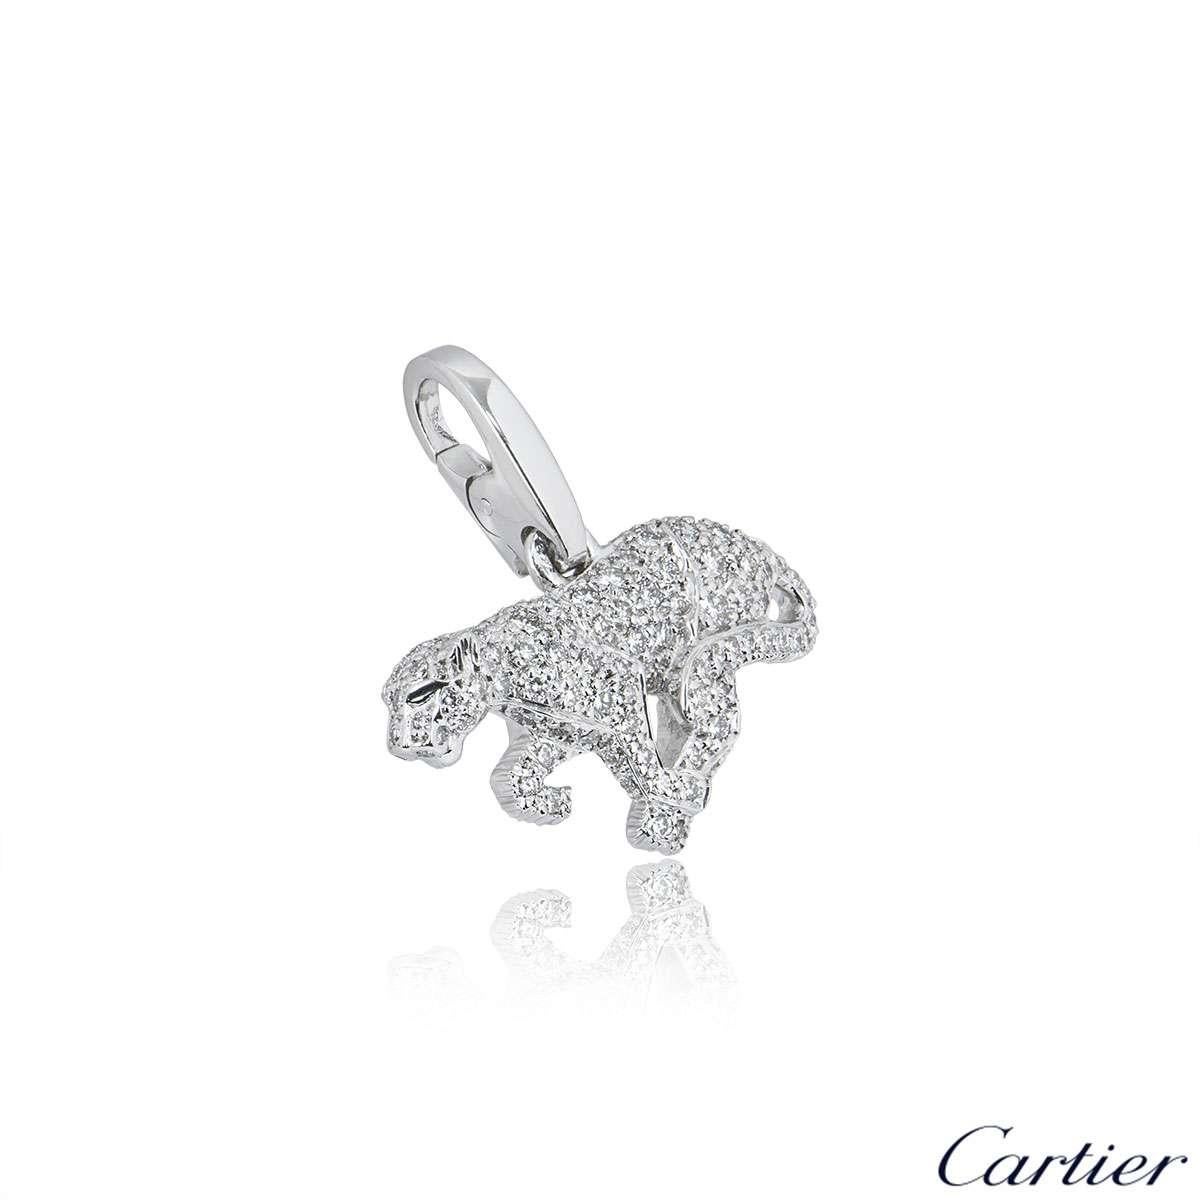 A beautiful 18k white gold diamond Cartier Panthere charm. The charm comprises of a panthere motif encrusted with round brilliant cut diamonds with a total weight of approximately 1.26ct. The charm features a lobster clasp and measures 2.3cm in